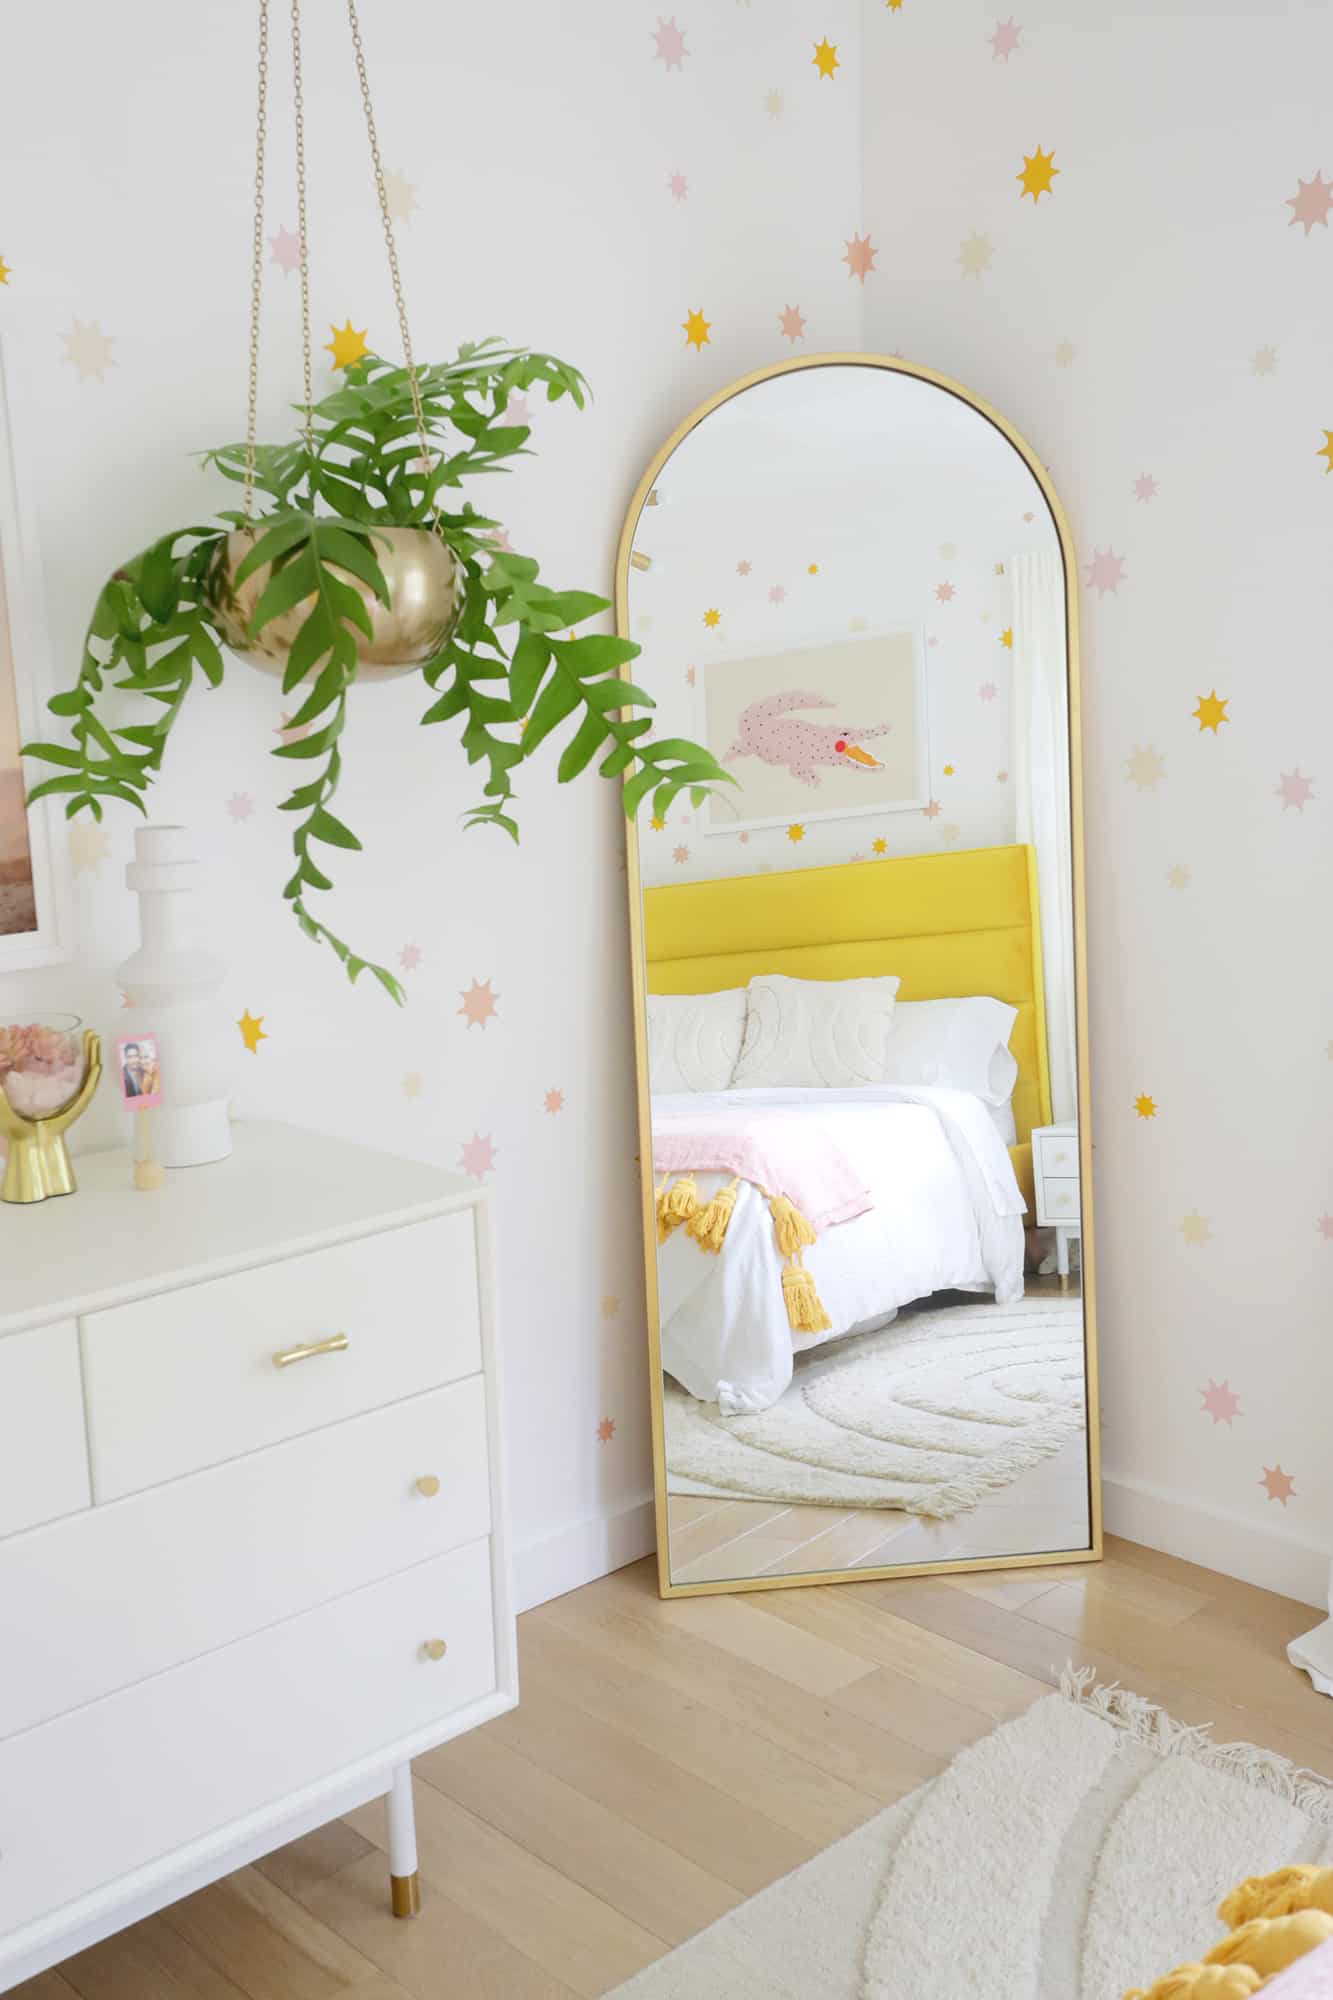 mirror with reflection of bedframe and hanging plant next to it